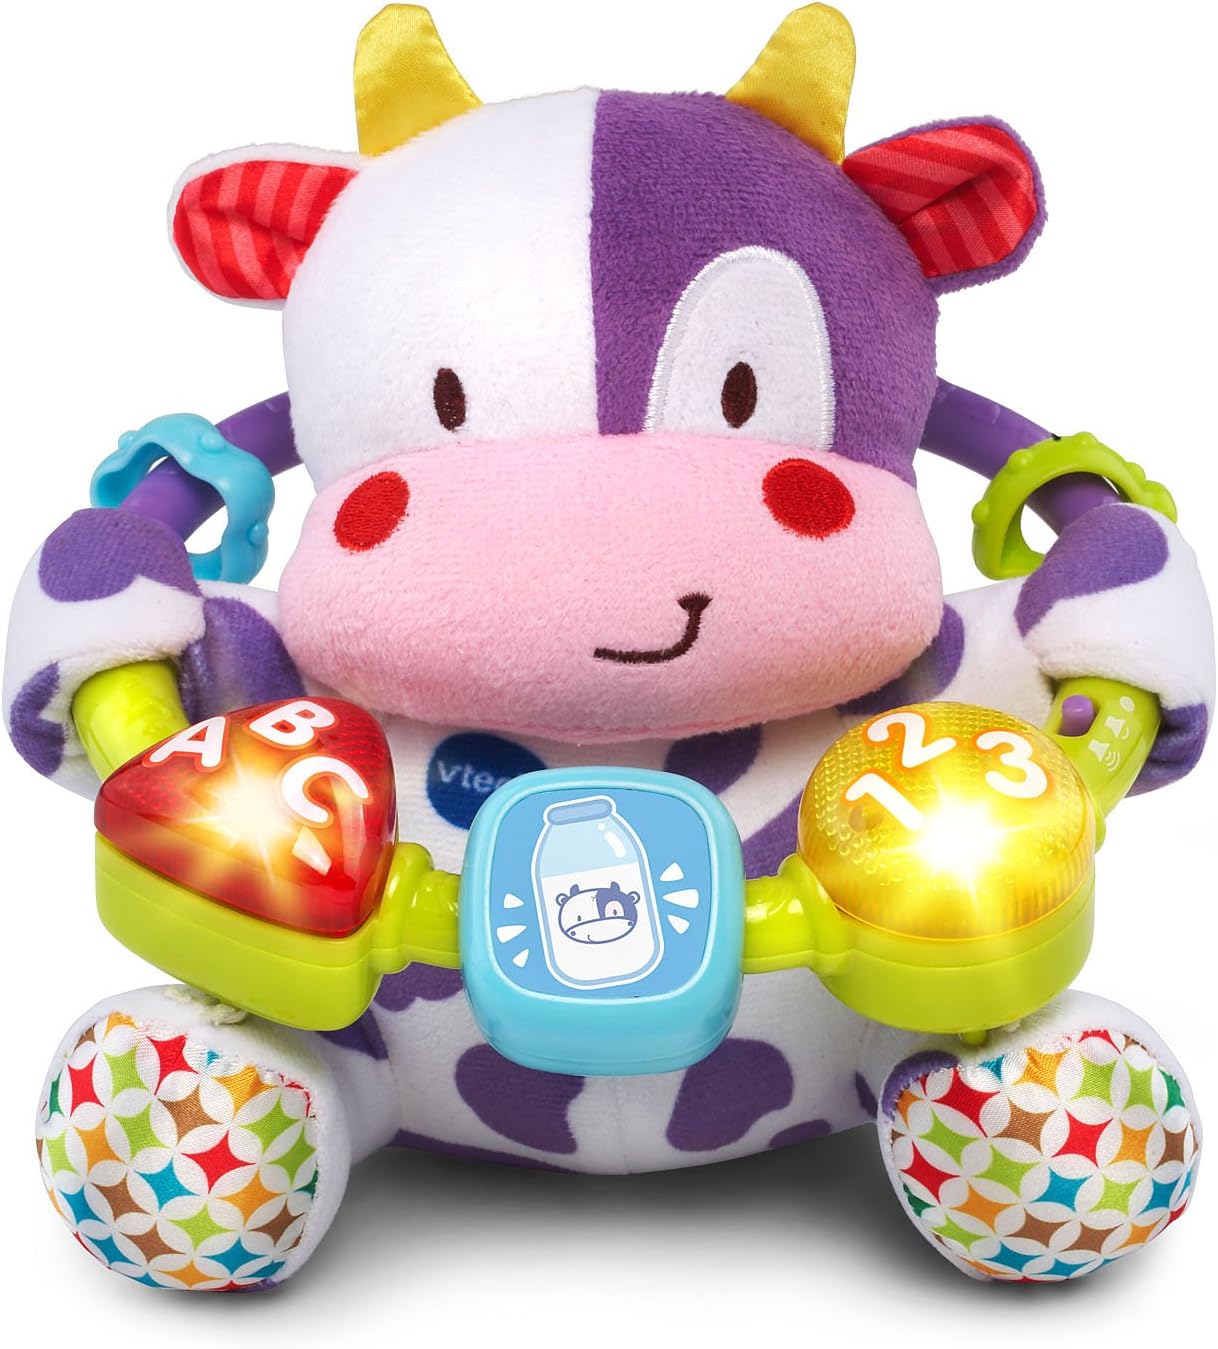 VTech Baby Lil’ Critters Moosical Beads Review